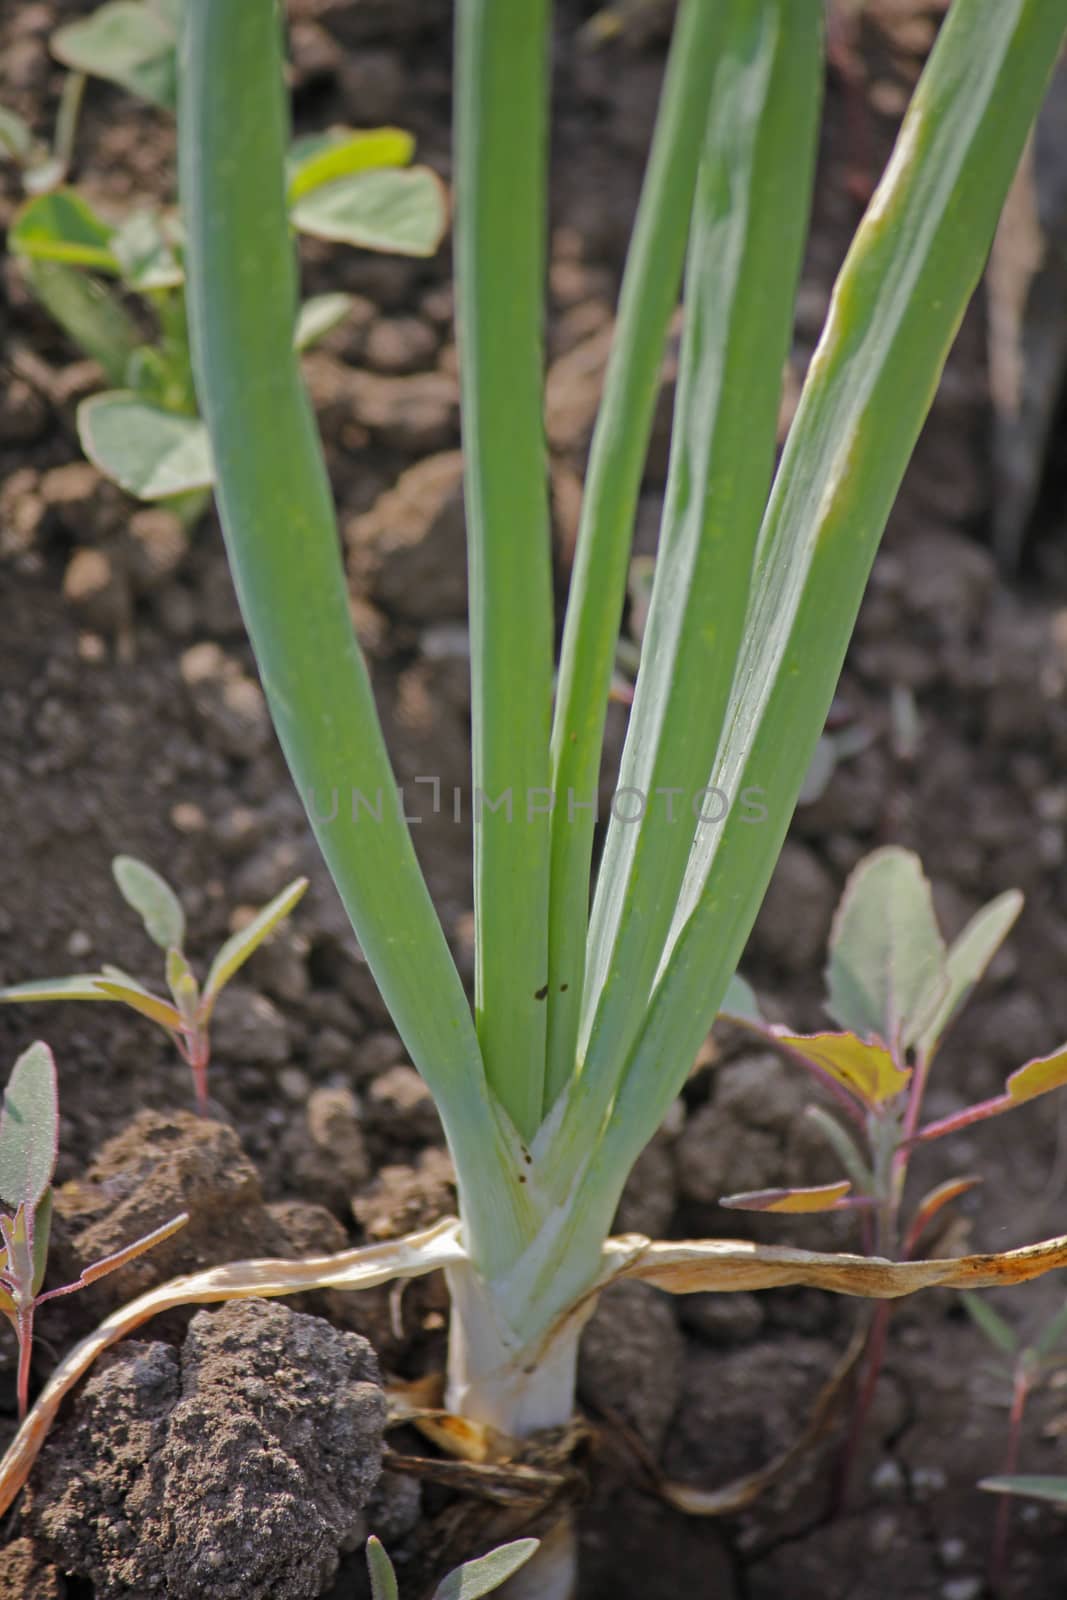 Roots, leaves and developing bulb of onion by yands